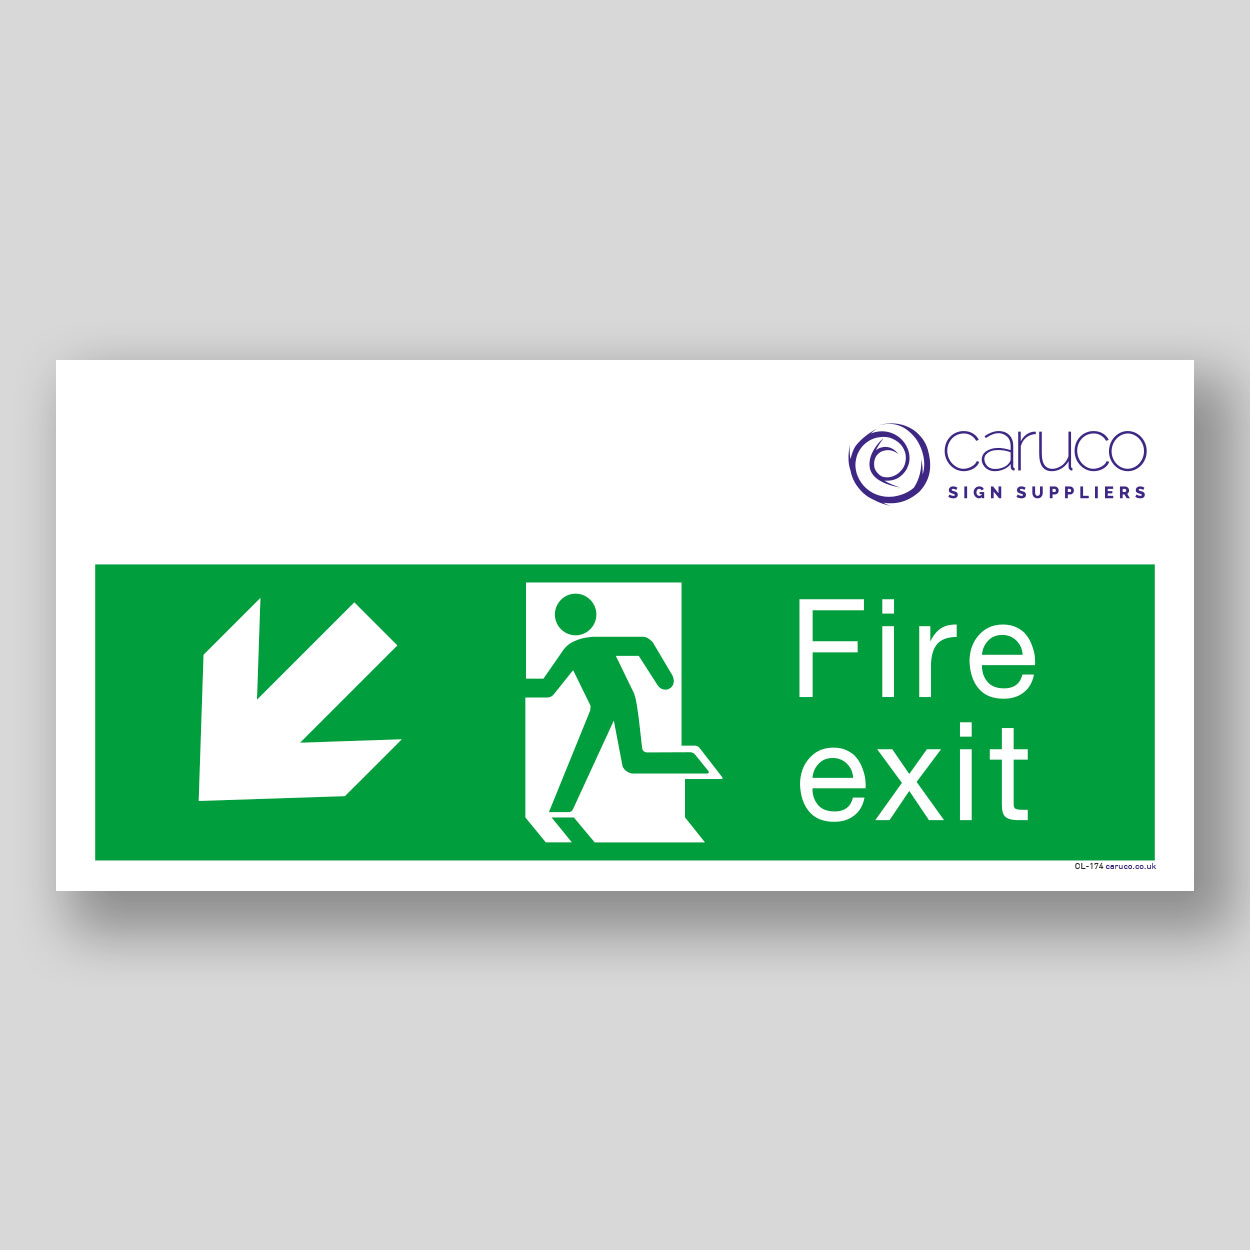 CL-174 Fire exit - with left down arrow